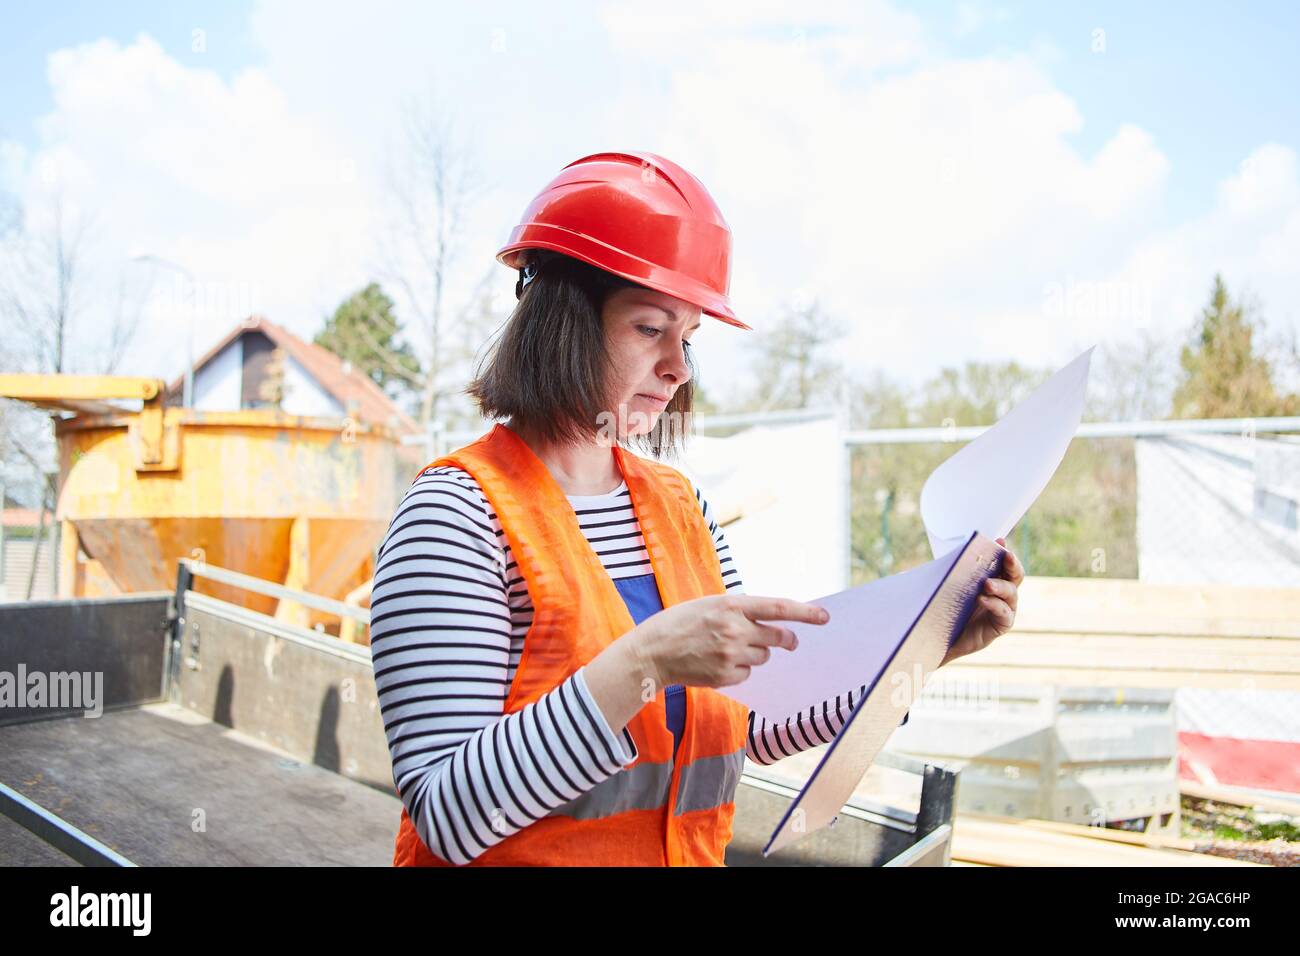 Architect with protective helmet on the construction site for building a house controls the construction project with a checklist Stock Photo